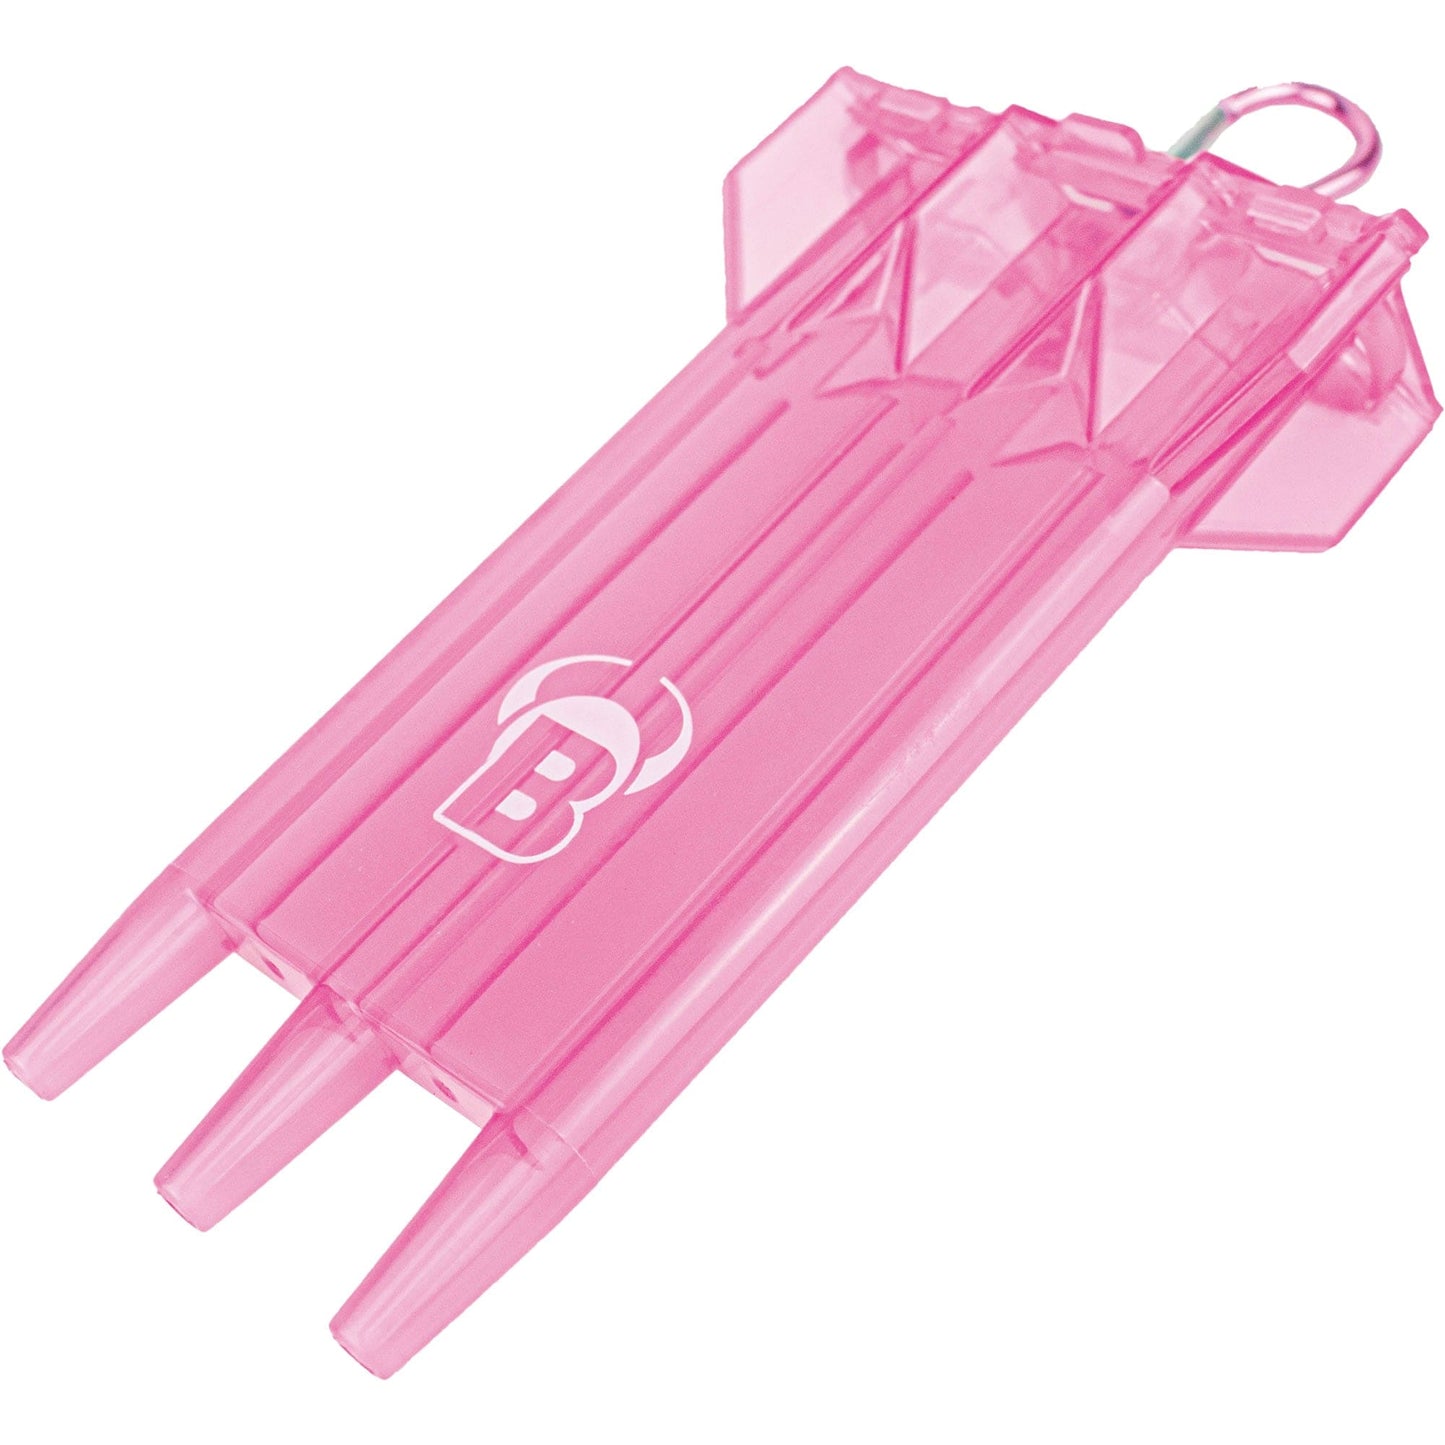 BULL'S Acra X Dart Case - Holds Fully Set Up Darts - Colours Pink